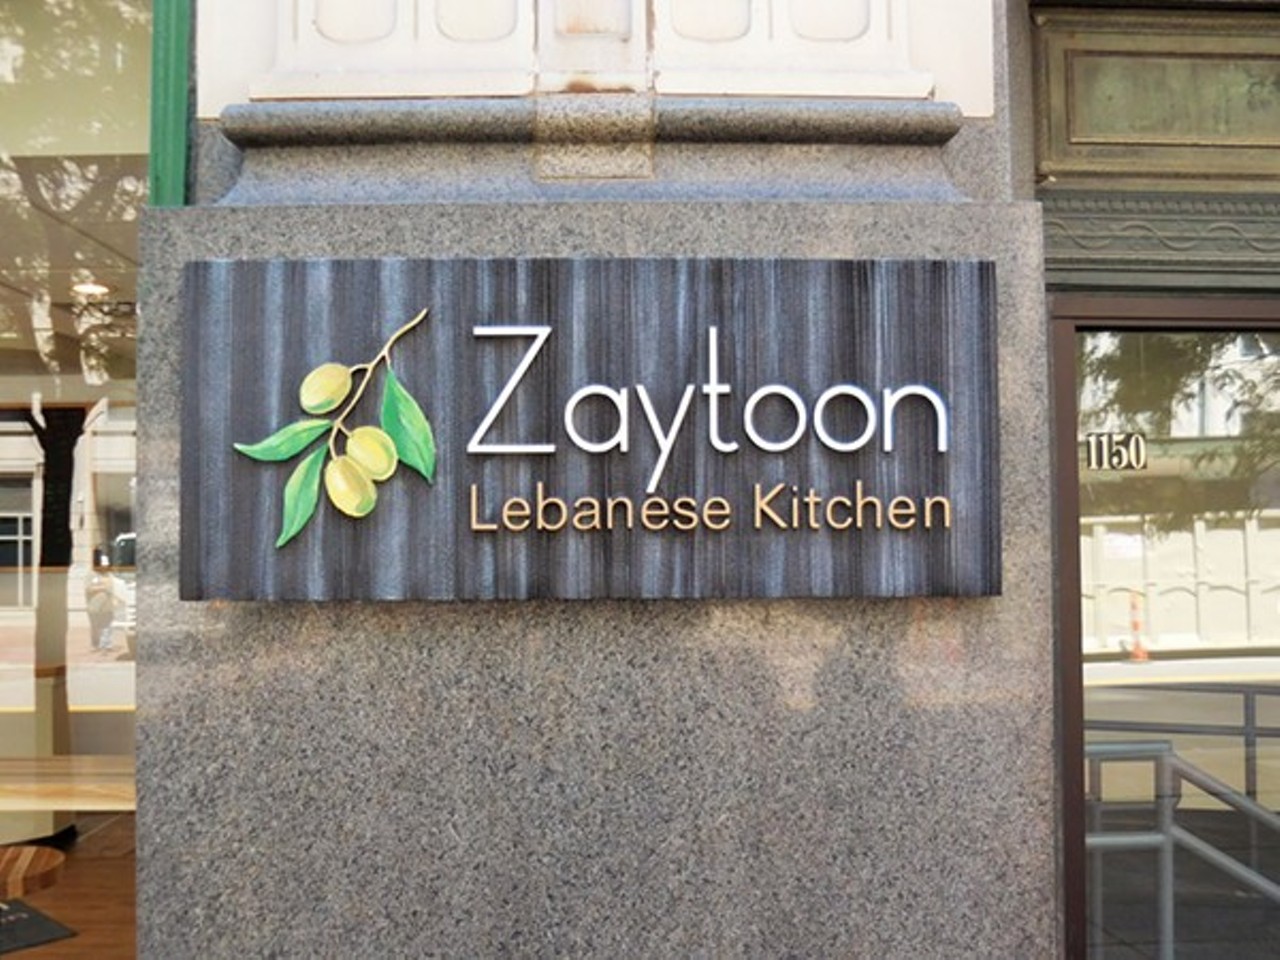  Zaytoon
1150 Huron Rd., Cleveland 
David Ina, the son of the owners of Al’s Deli, worked at his family restaurant to gain experience before opening his own place down the street. Zaytoon specializes in Lebanese food like fattoush and shwarma.